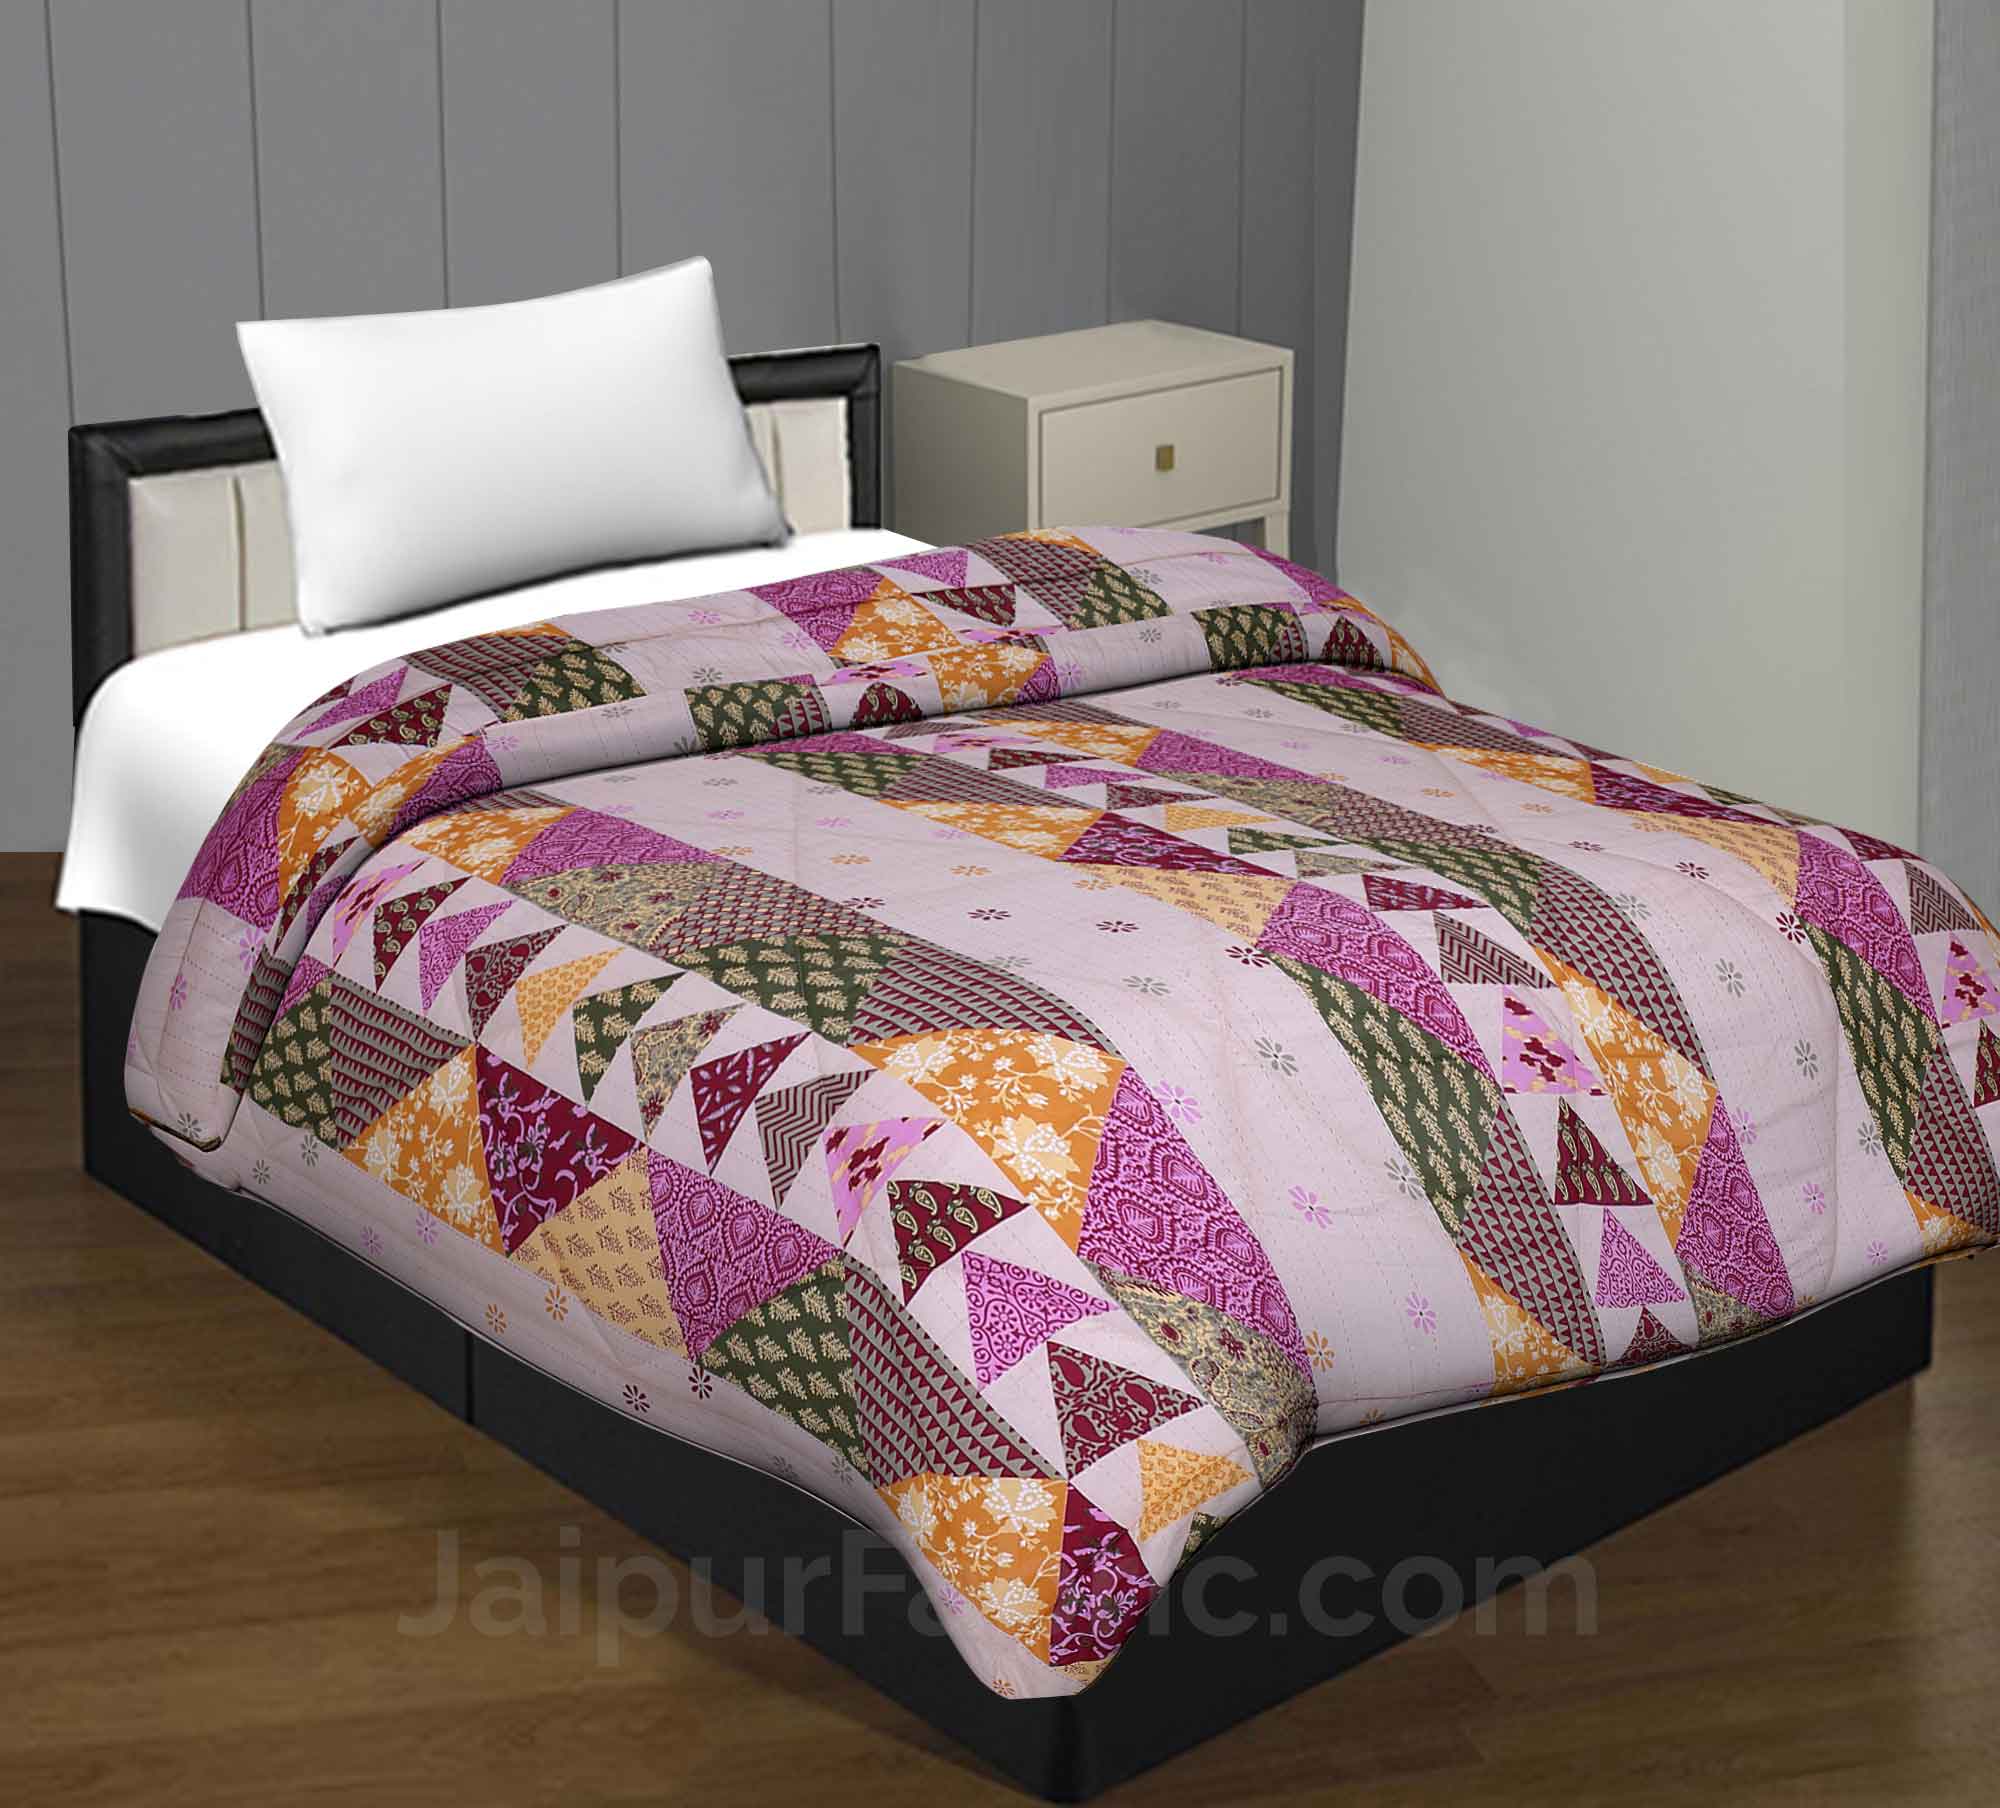 Pink Twill Cotton Single Bed With Colorful Patchwork Design Comforter